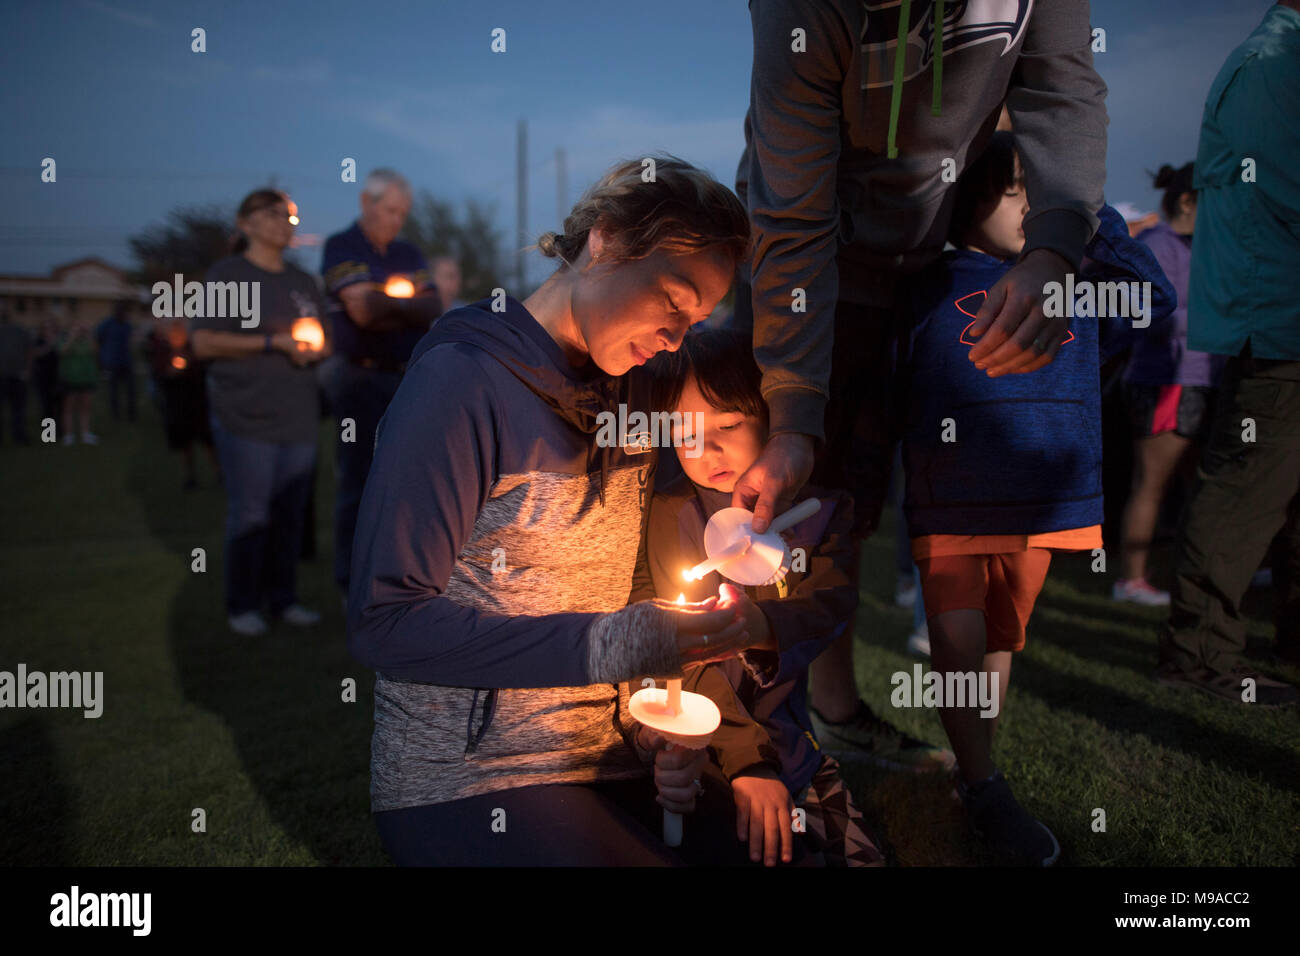 Cathrina and Cylus Rencken mourn at a candlelight vigil in Pflugerville, TX, for the victims of recent Austin package bombs, and to pray for the family of Mark A. Conditt, a resident accused of masterminding the attacks Stock Photo